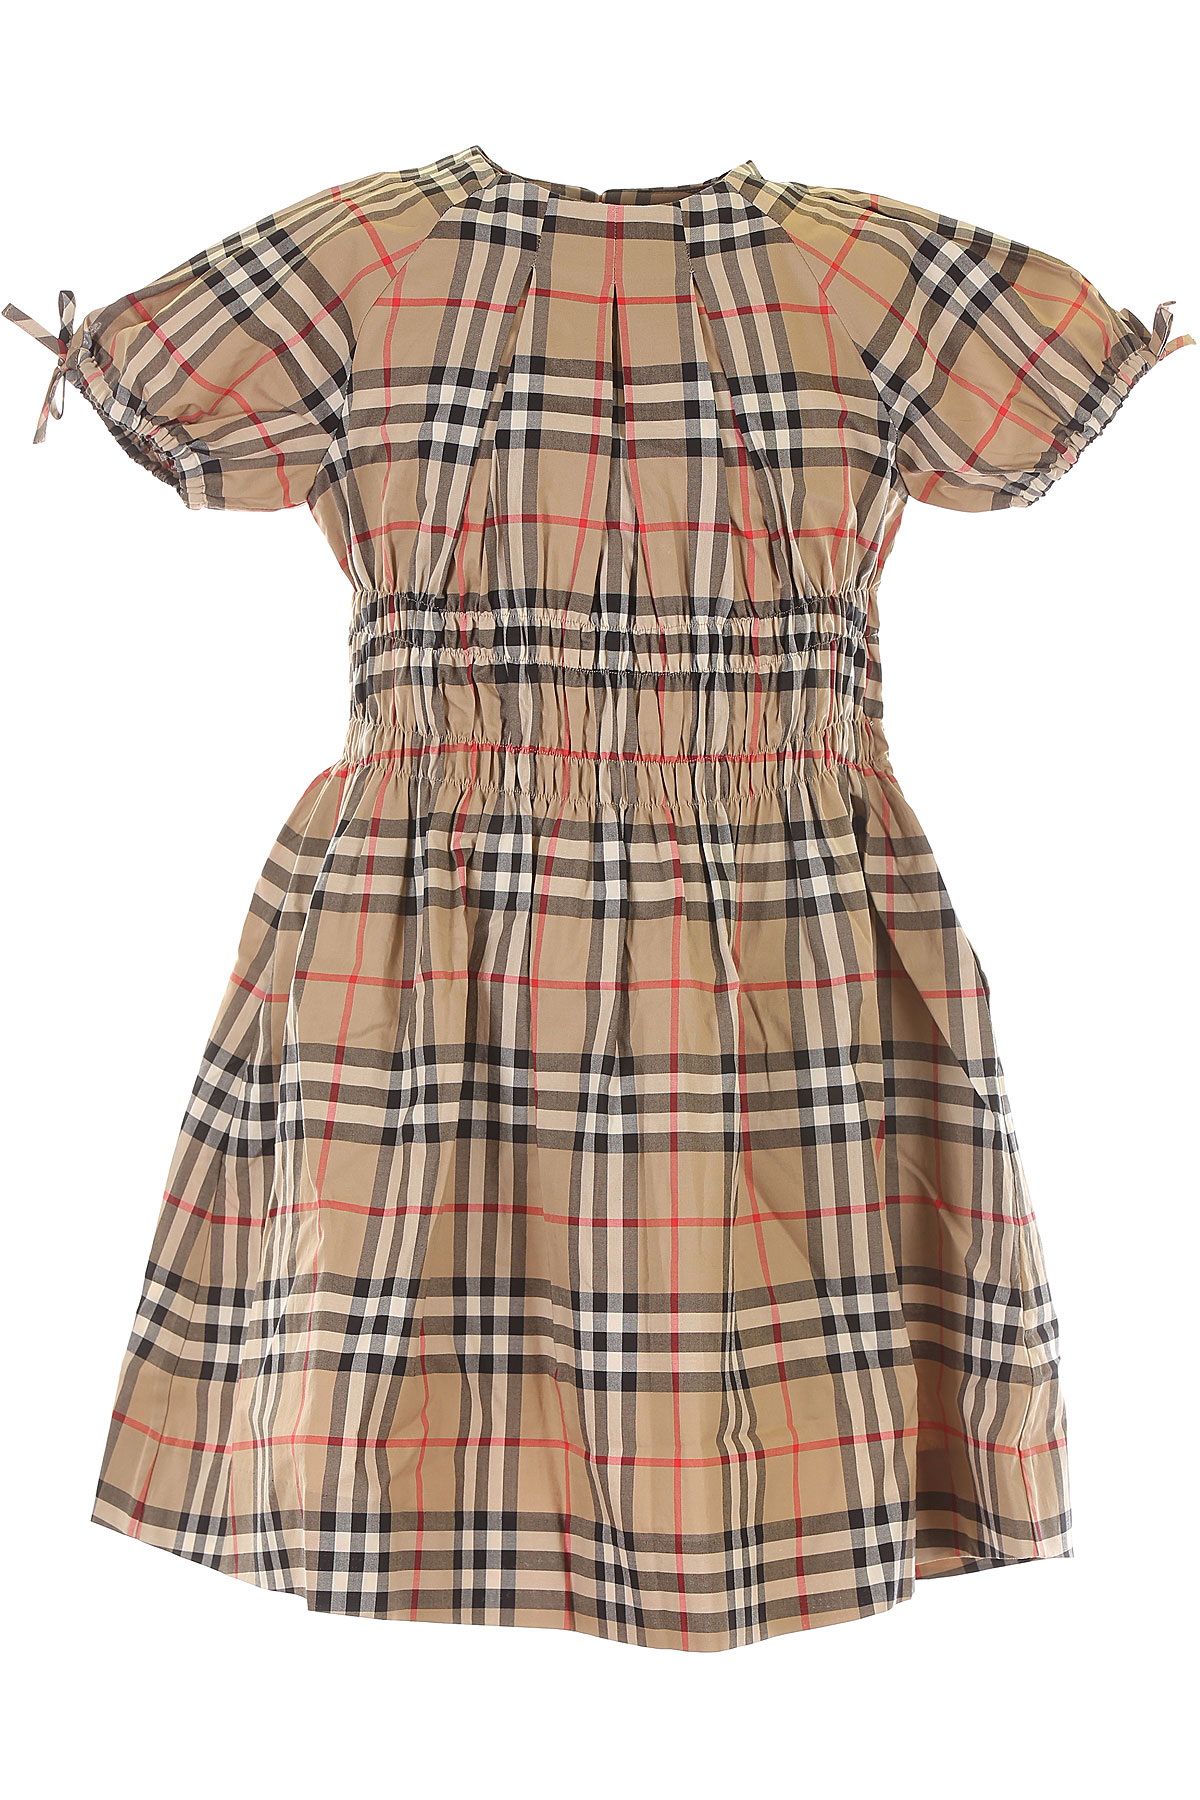 Girls Clothing Burberry, Style code: 8024431-a7028-